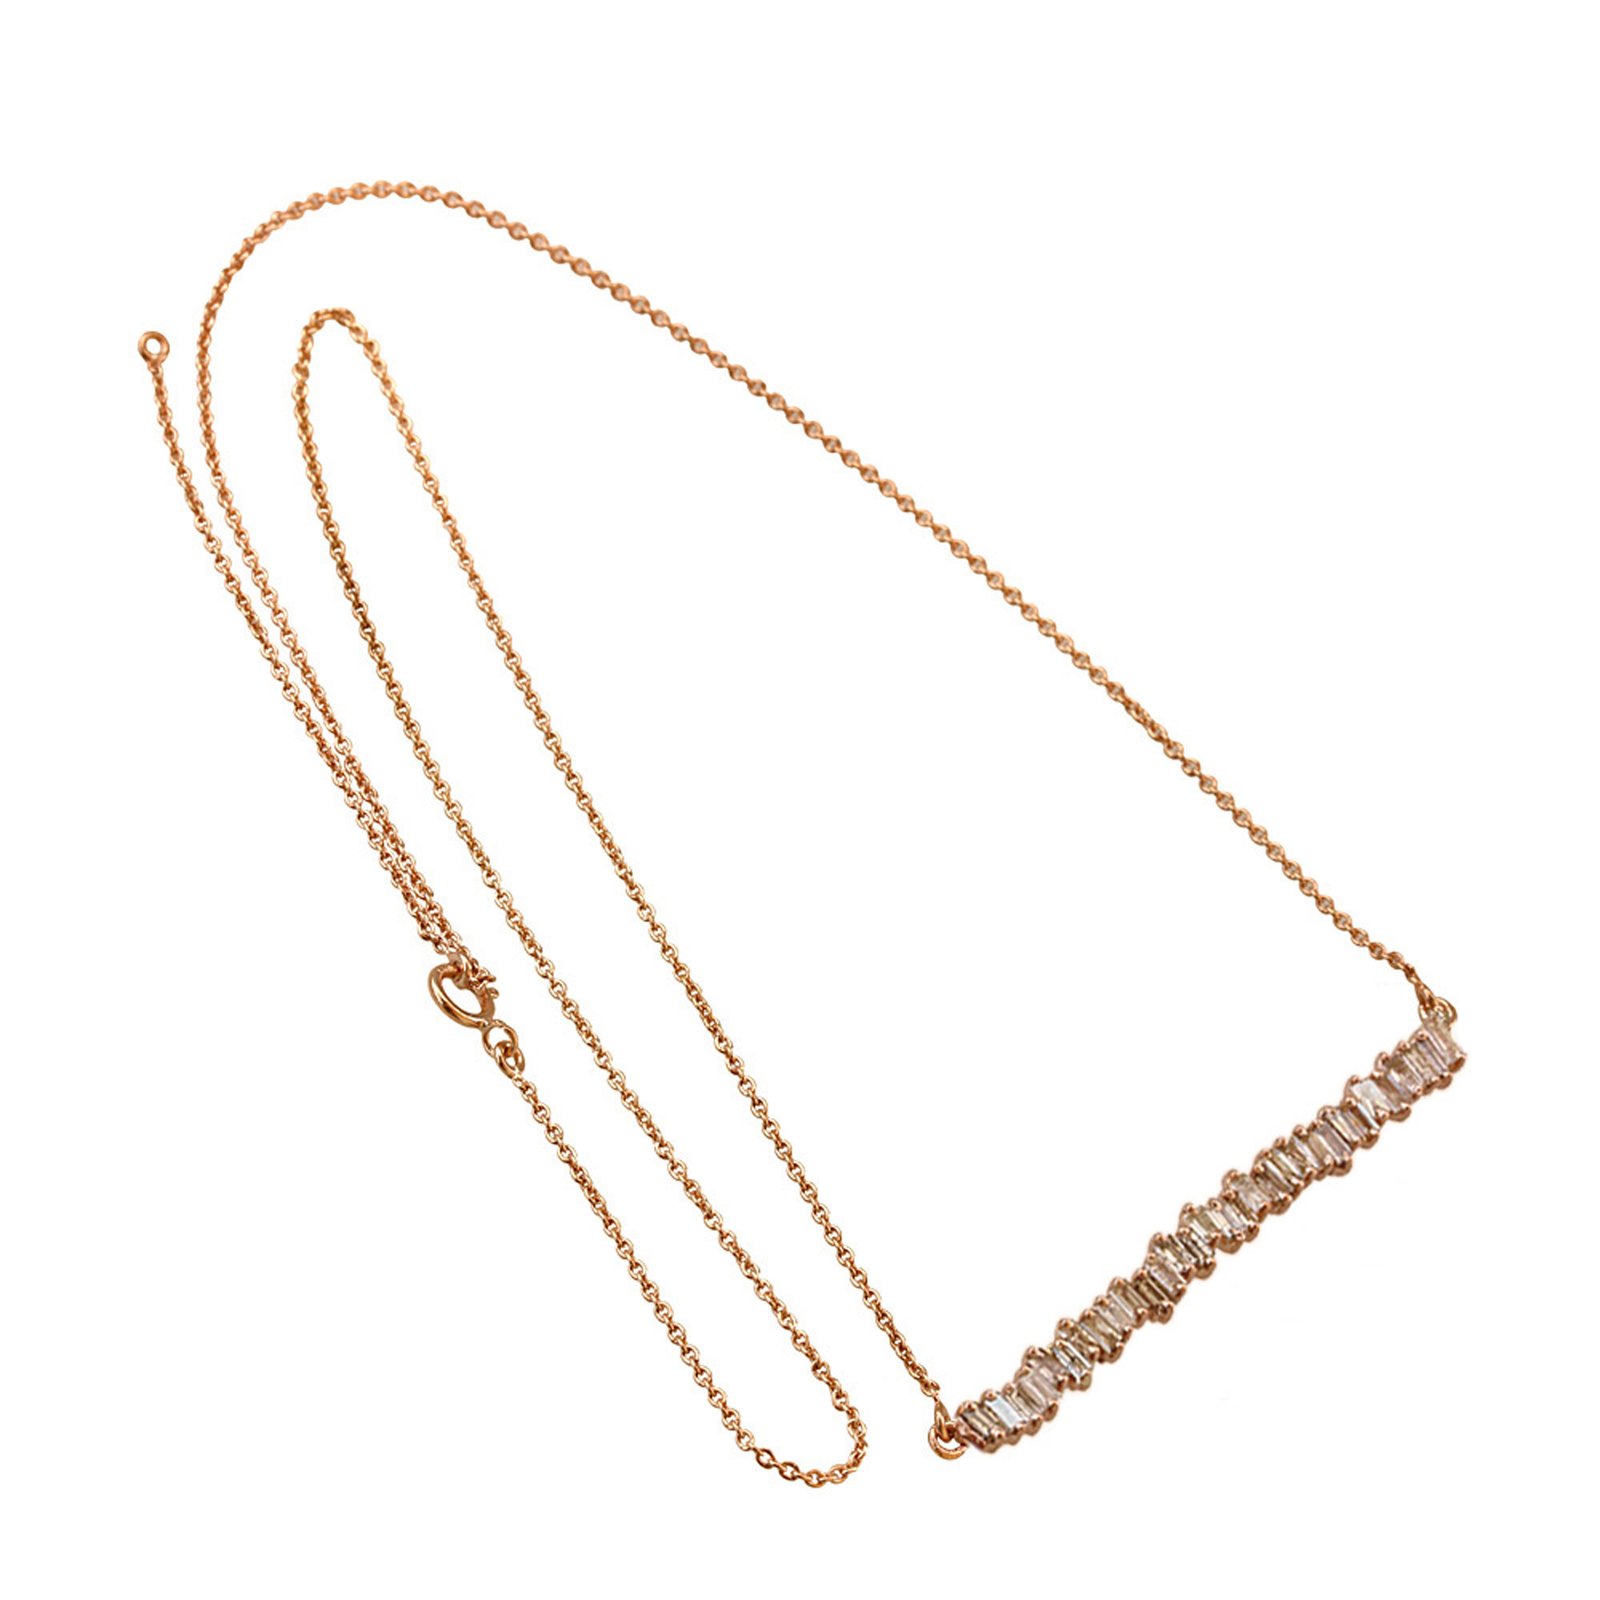 18k Solid gold baguette diamond necklace with chain